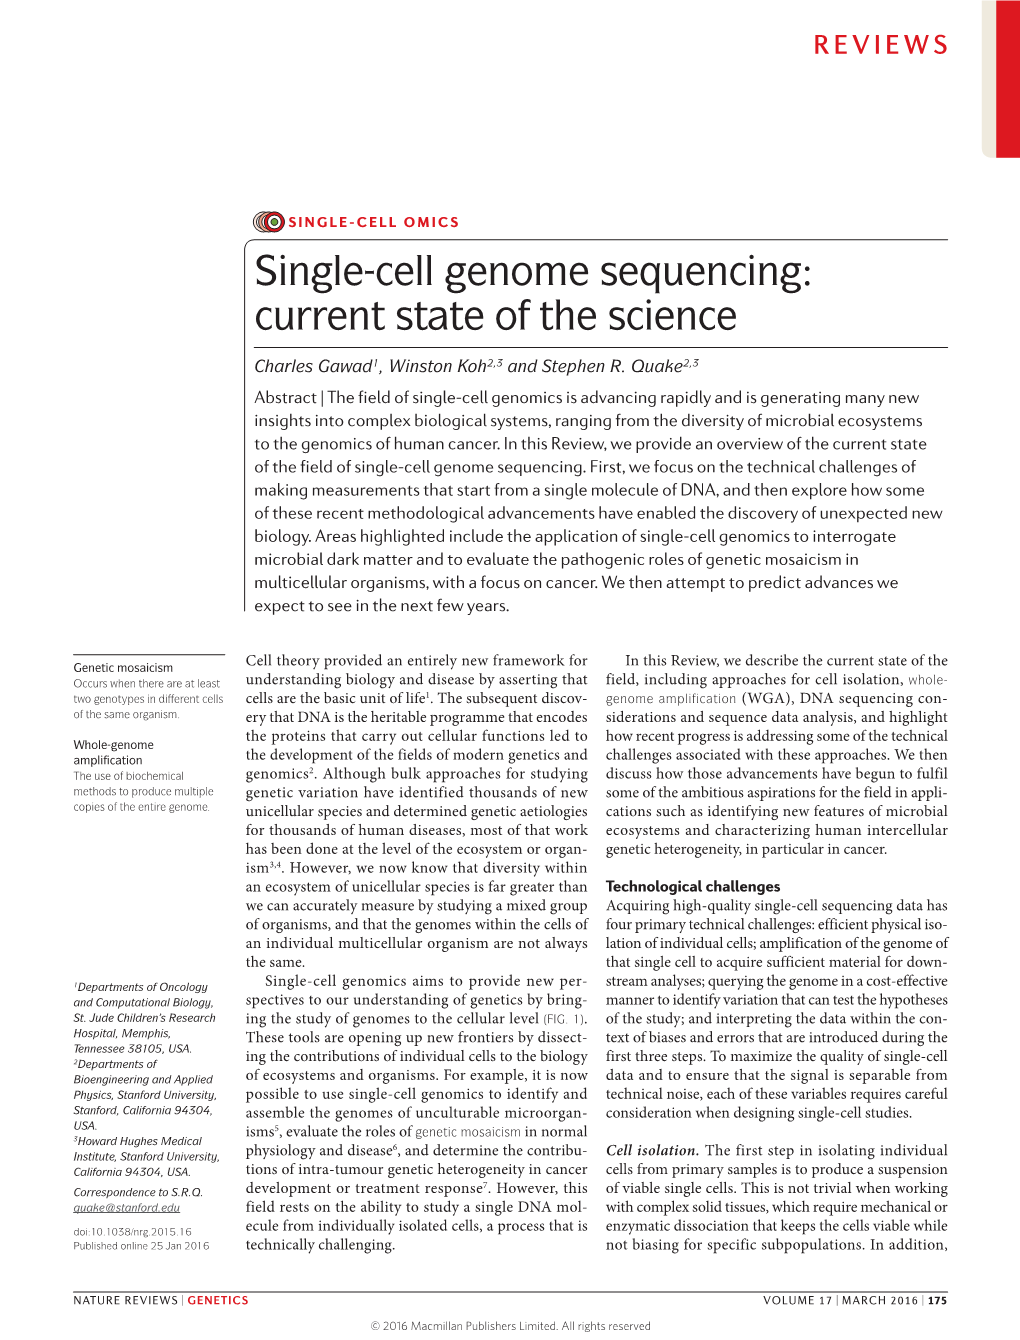 Single-Cell Genome Sequencing: Current State of the Science